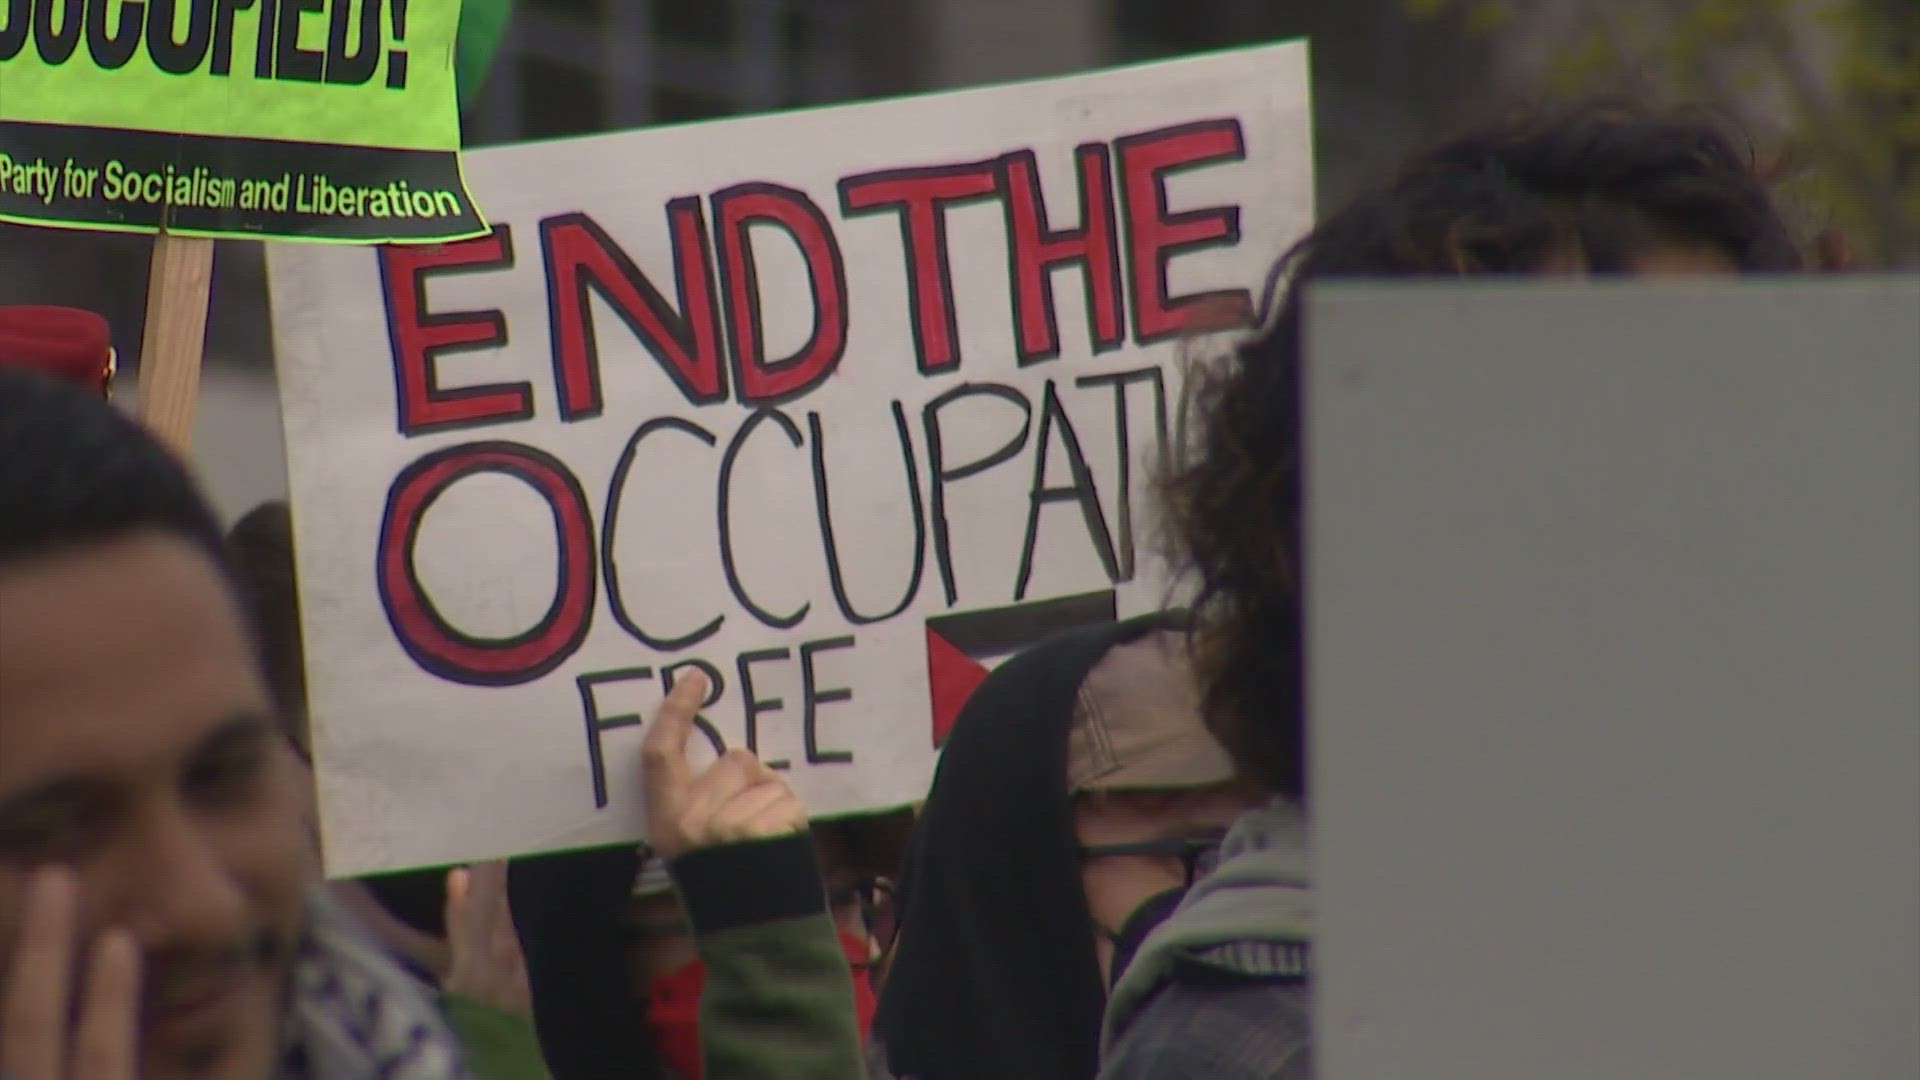 Students at several western Washington high schools will be walking out in support of Palestine on Tuesday